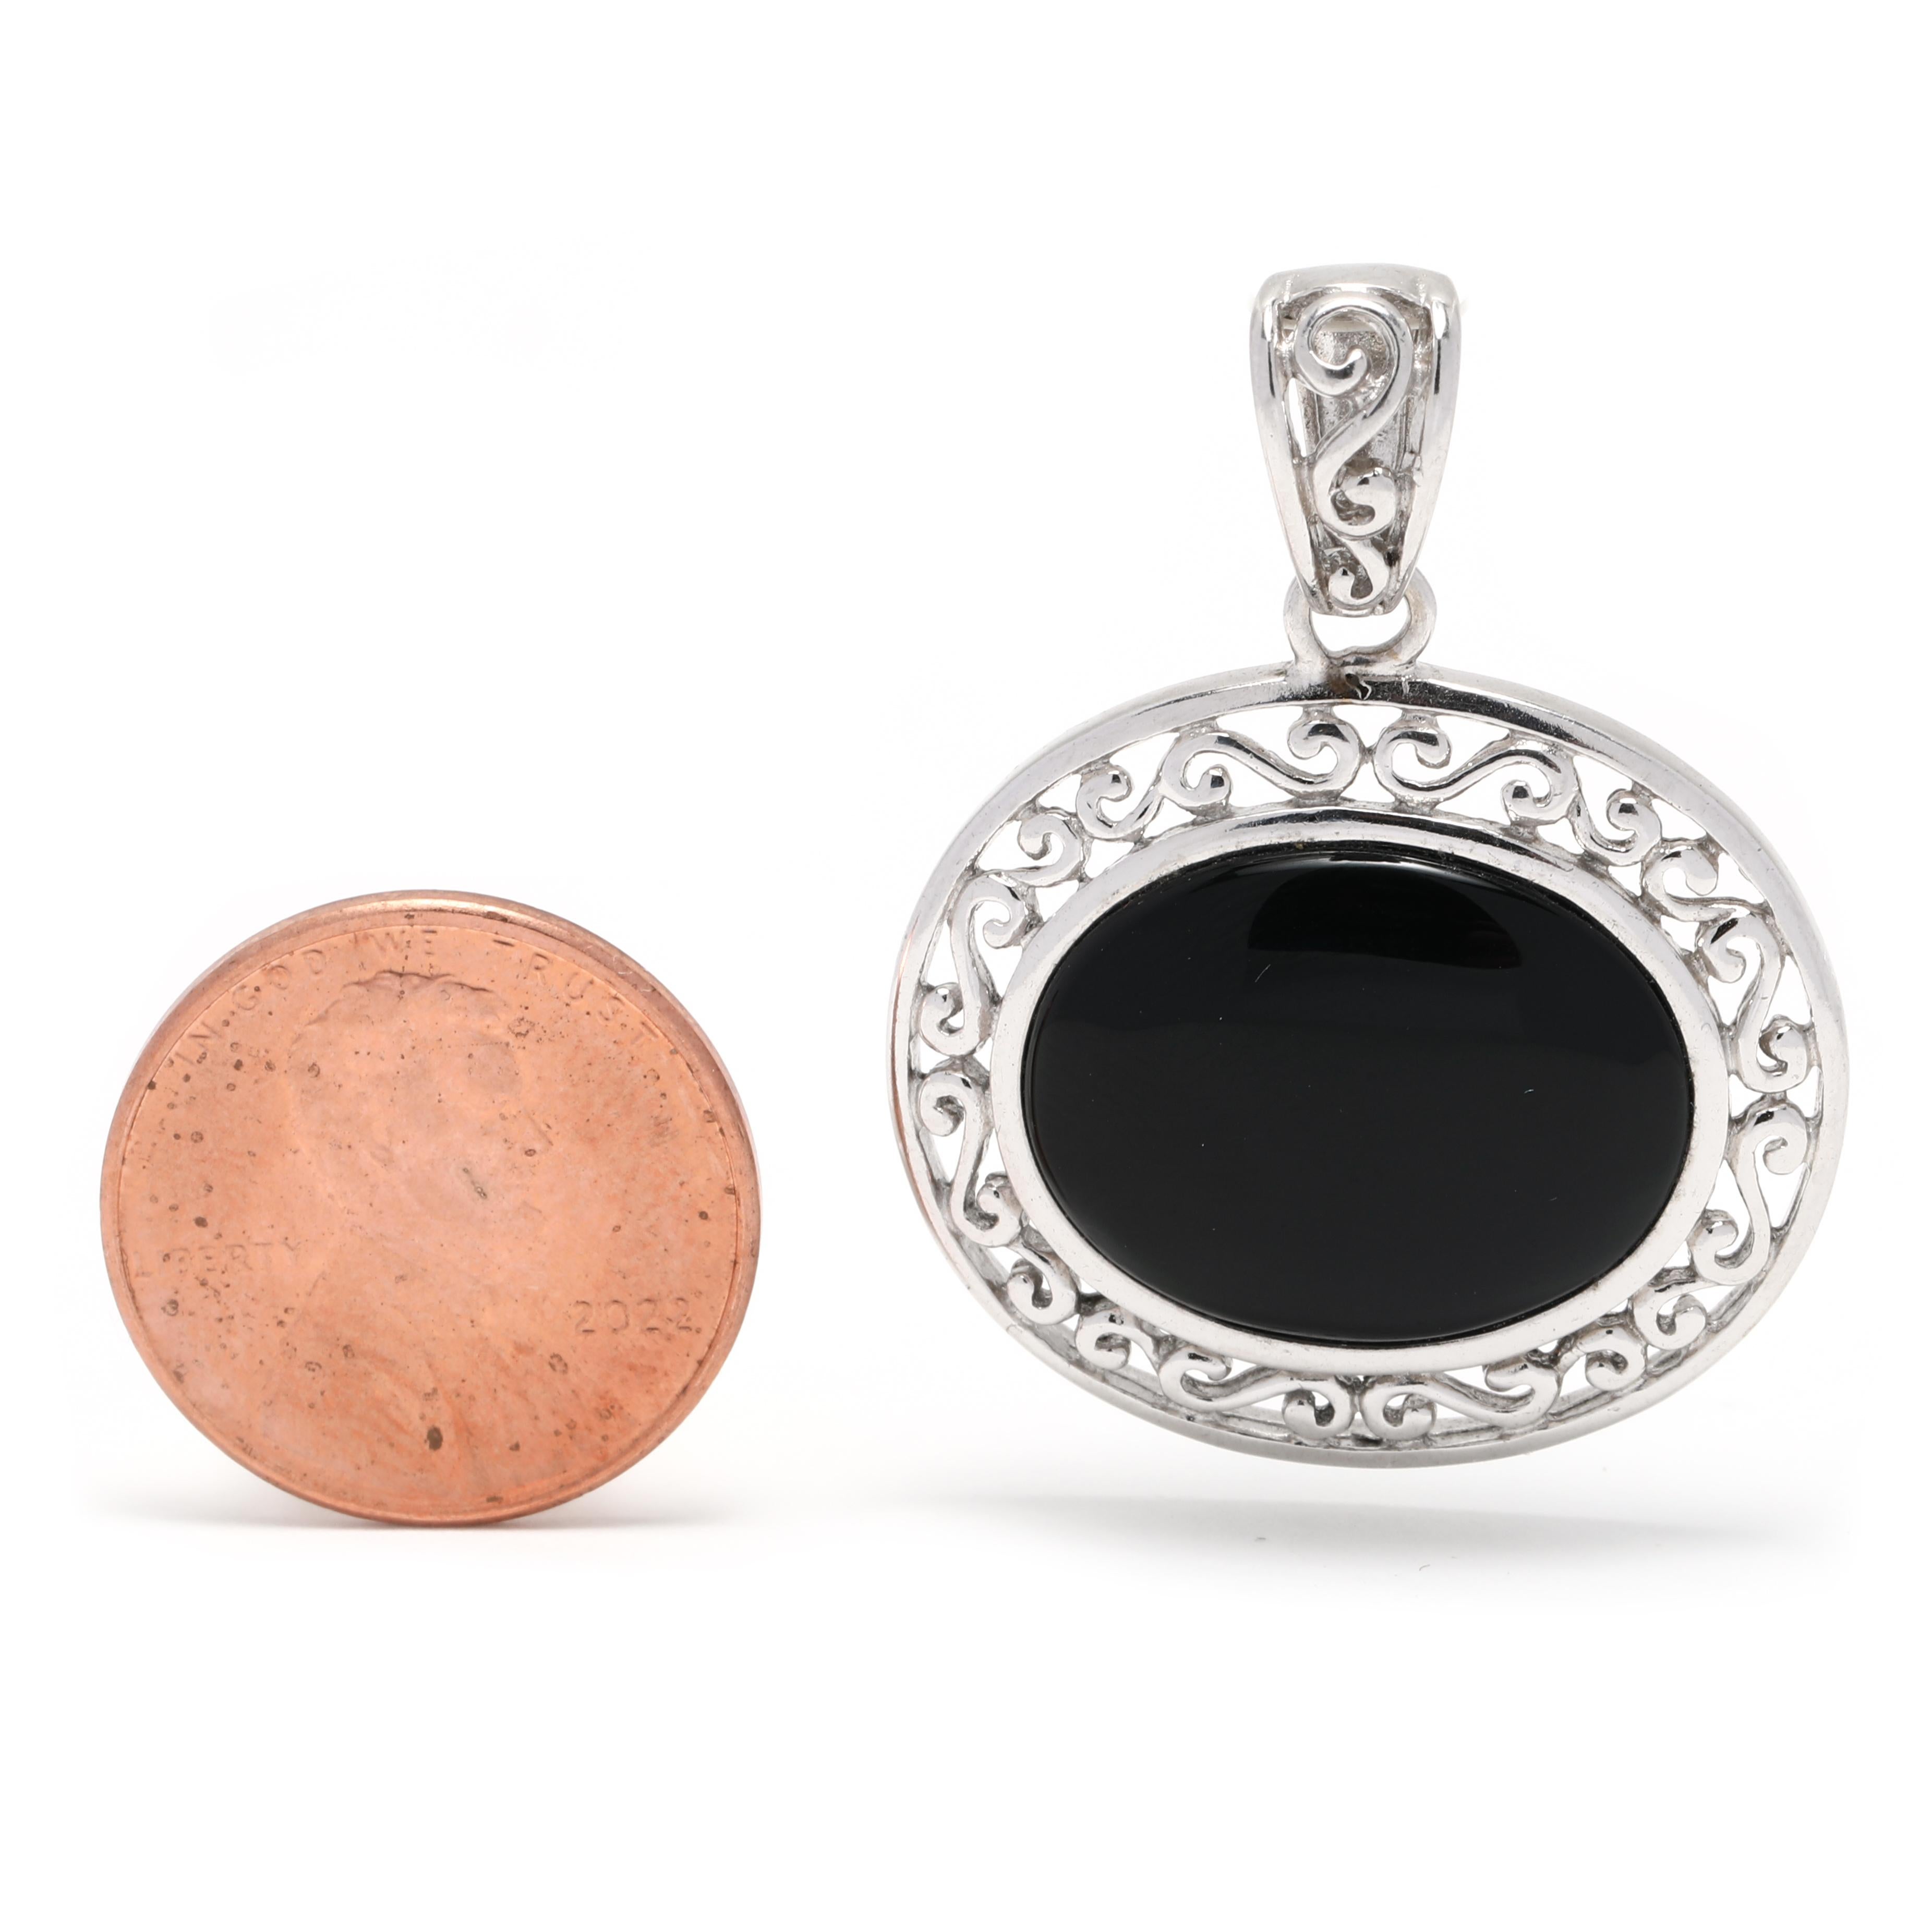 This stunning vintage black onyx filigree pendant is crafted from sterling silver and features an oval black onyx stone. The intricate filigree design is sure to make a statement. The pendant measures 1 3/8 inches in length and is a perfect addition